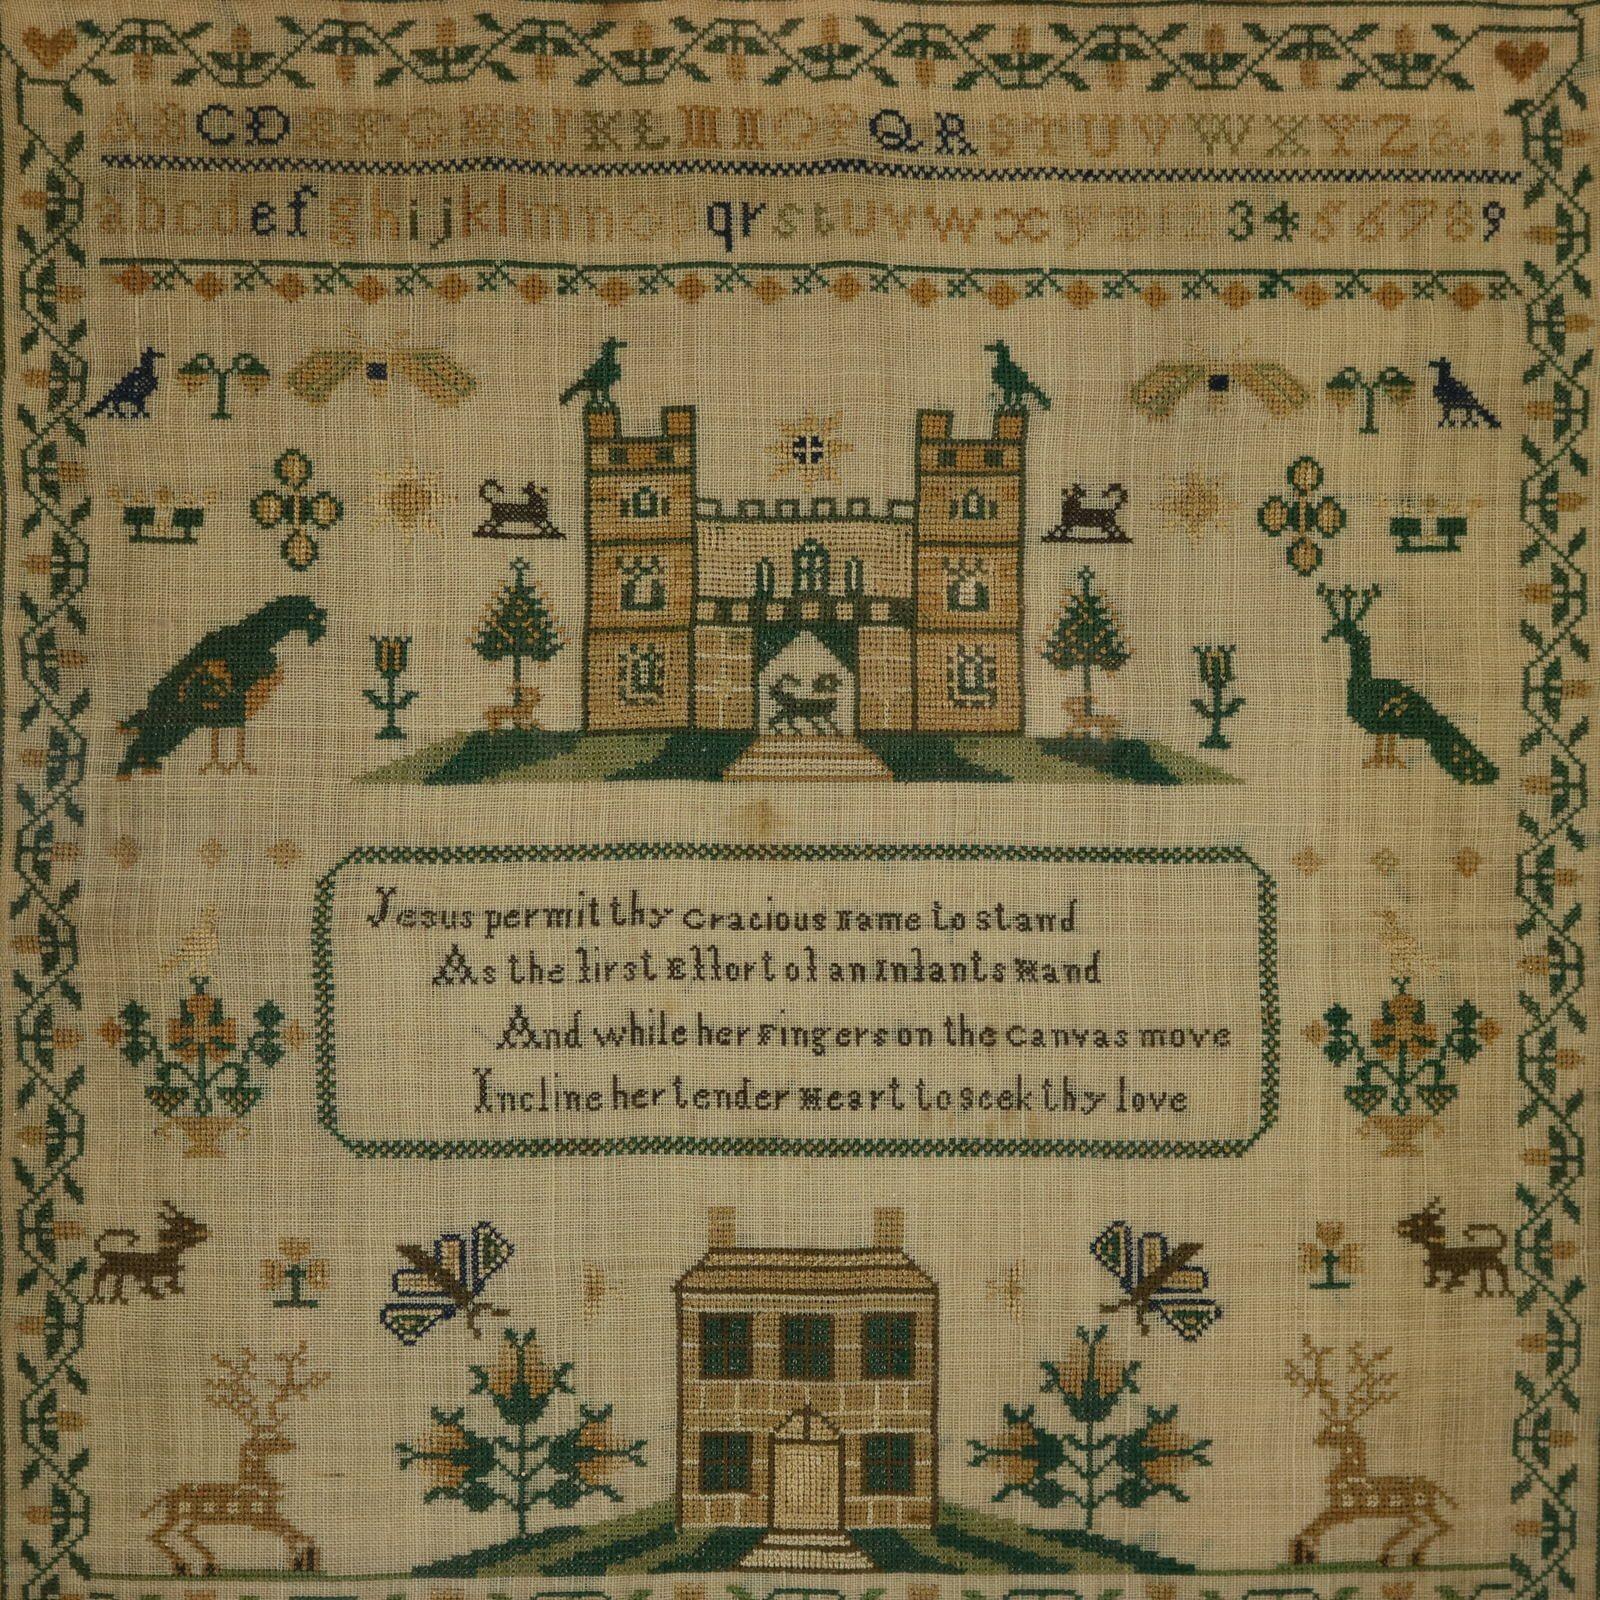 Victorian Sampler, 1840, By Elizabeth Ann Fox. The sampler is worked in silk threads on a linen ground, mainly in cross stitch. Meandering strawberry border. Colours green, dark brown, copper, gold, silver, black and blue. Alphabets A-Z in upper